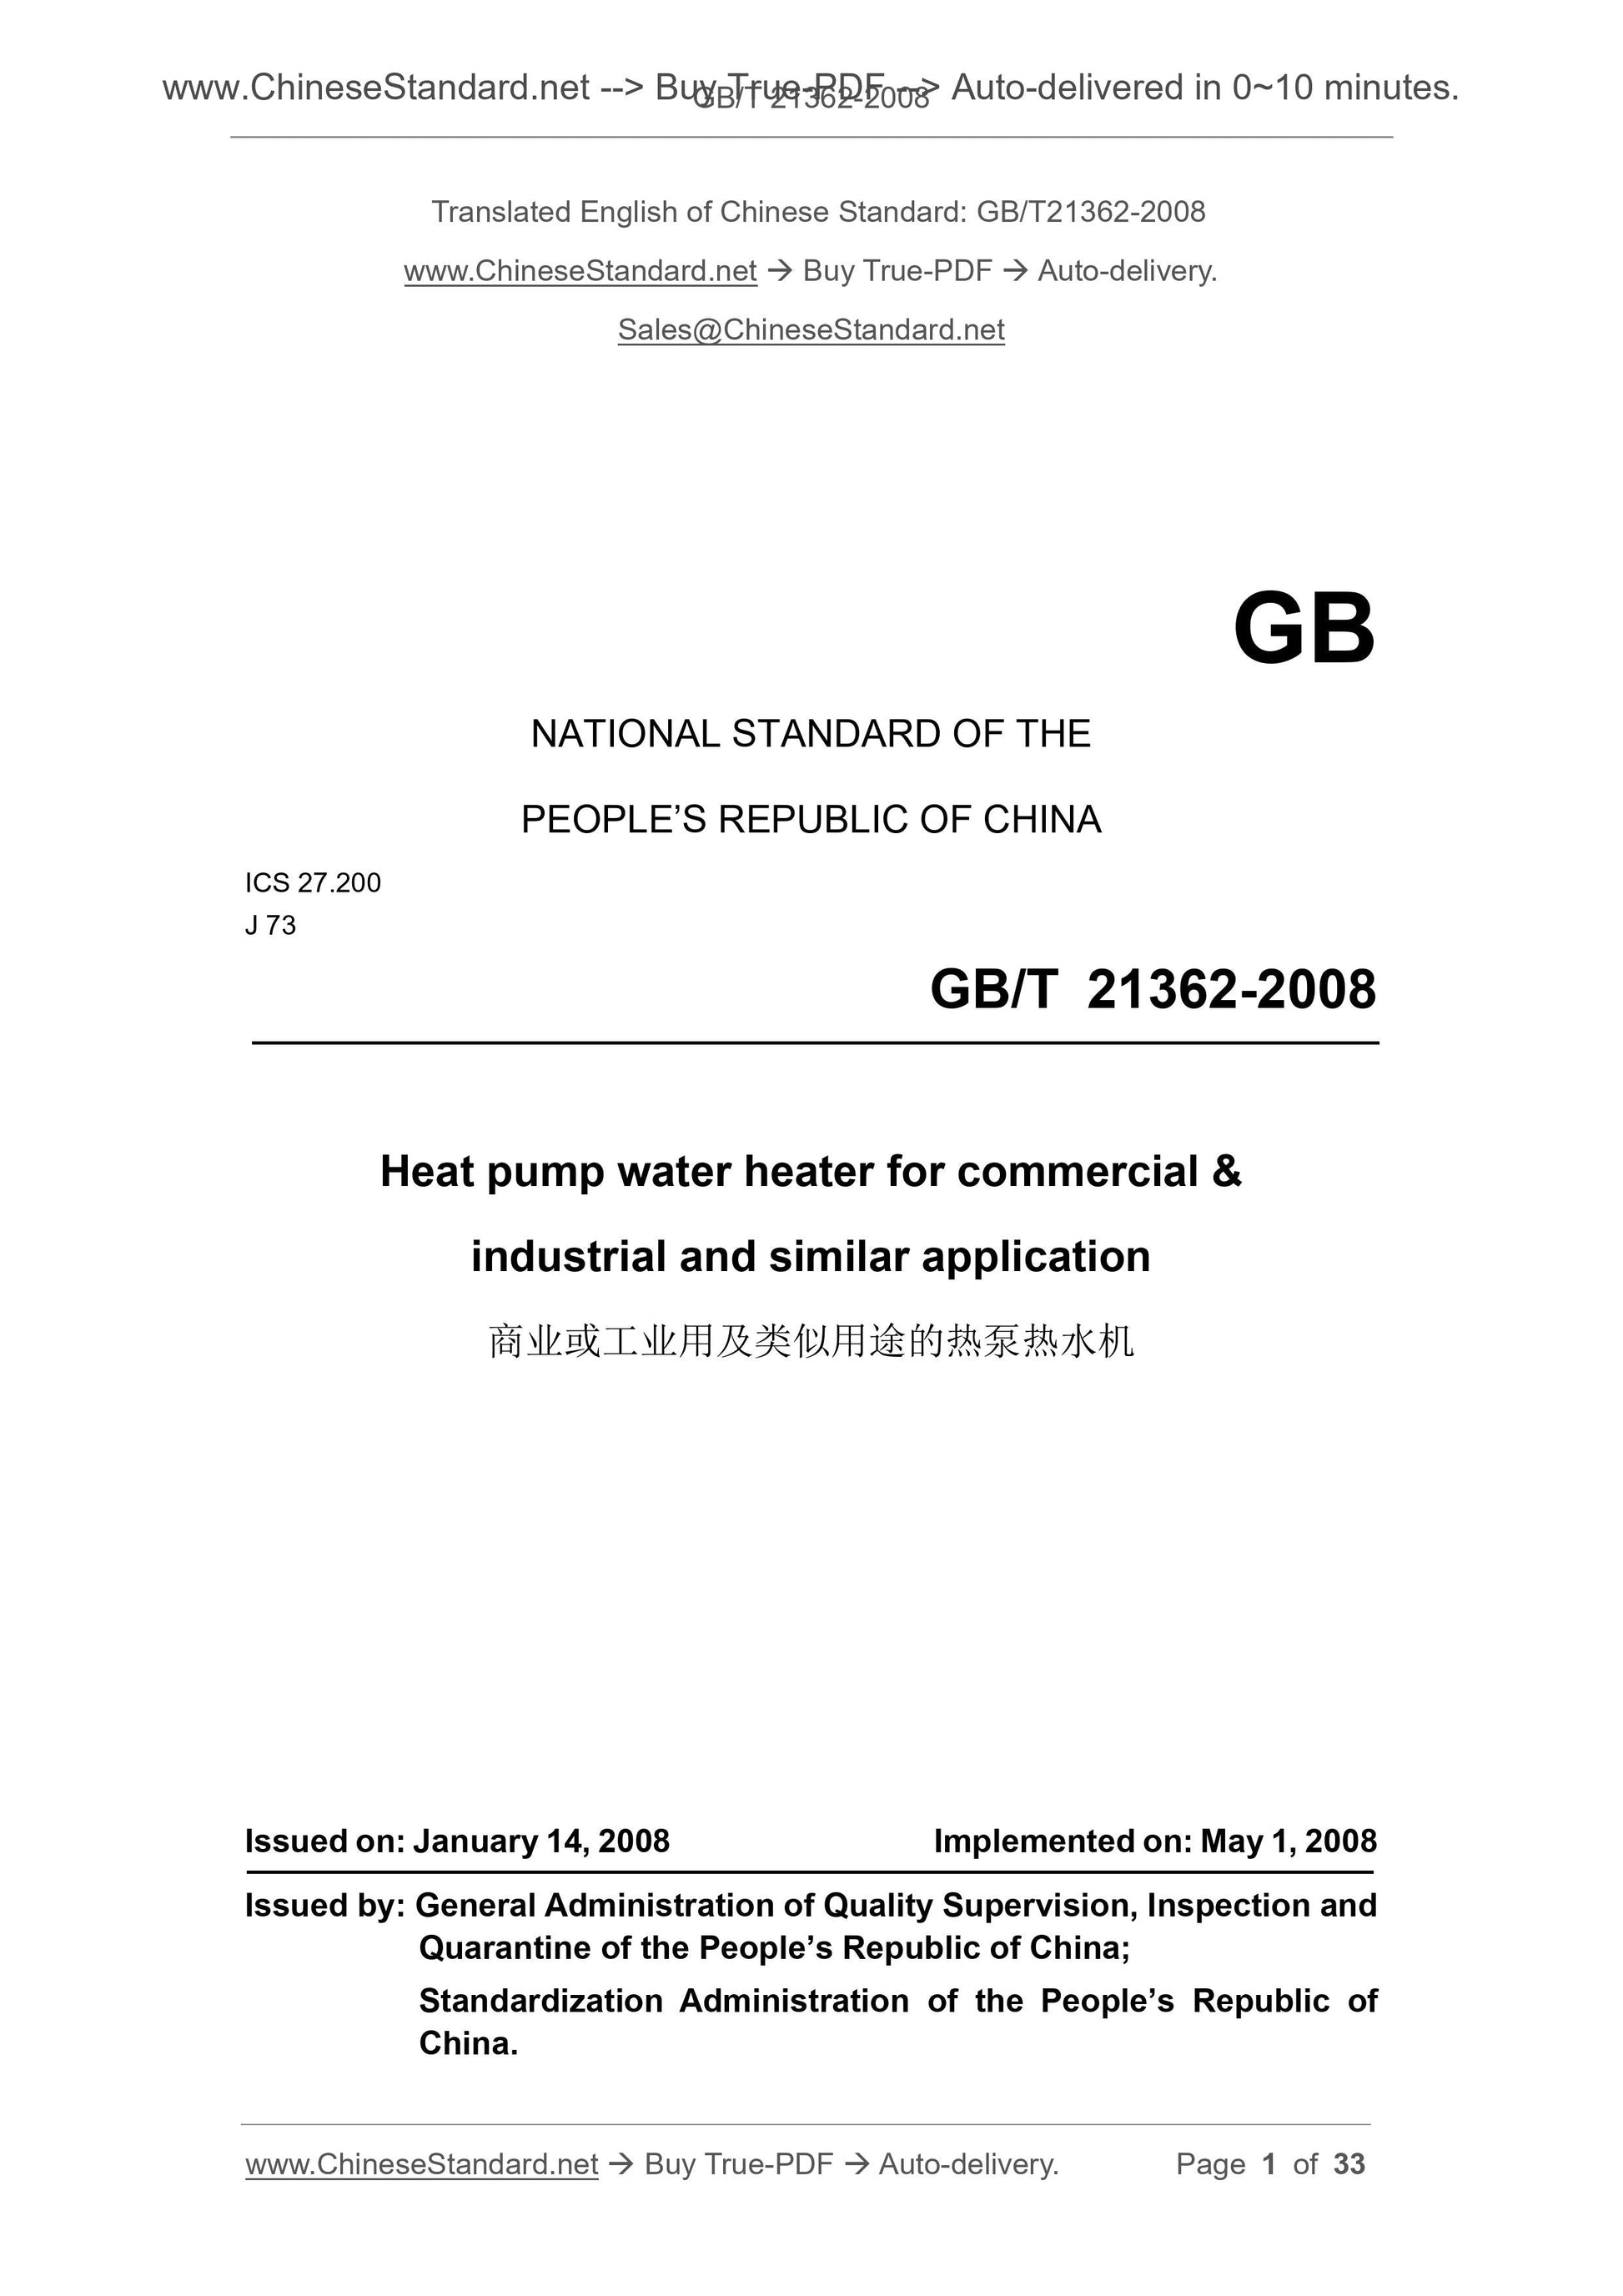 GB/T 21362-2008 Page 1